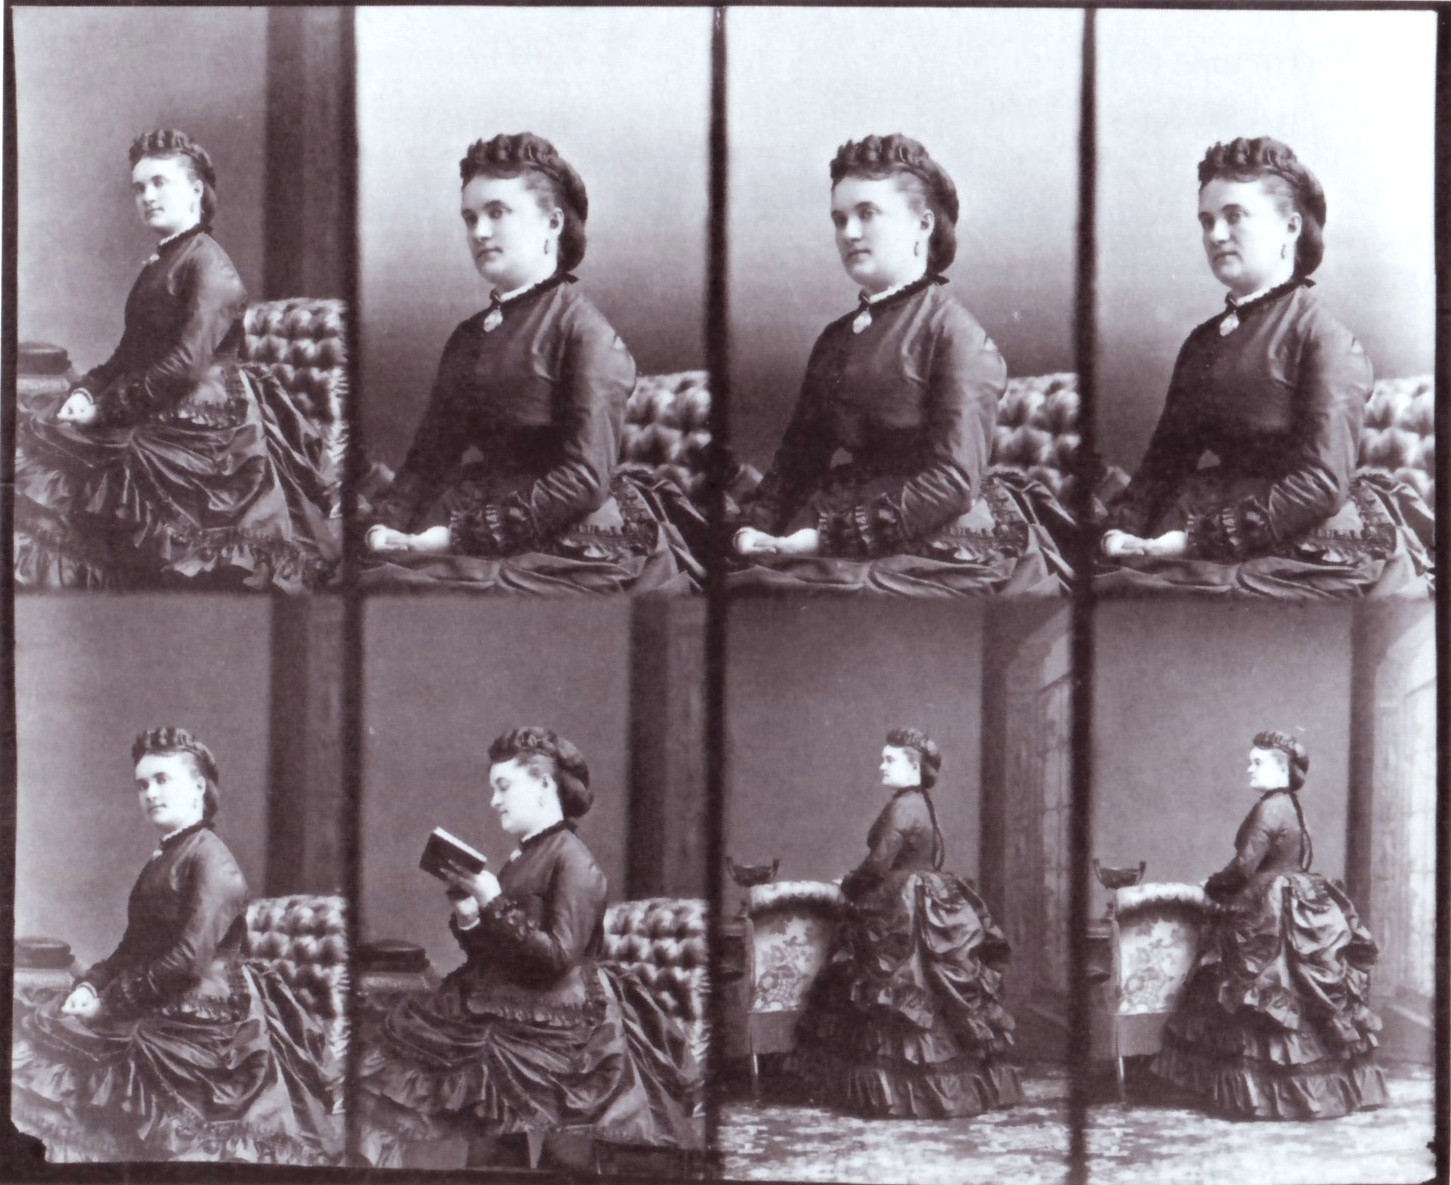 Zulma Bouffar photographed by André Disdéri in 1866.